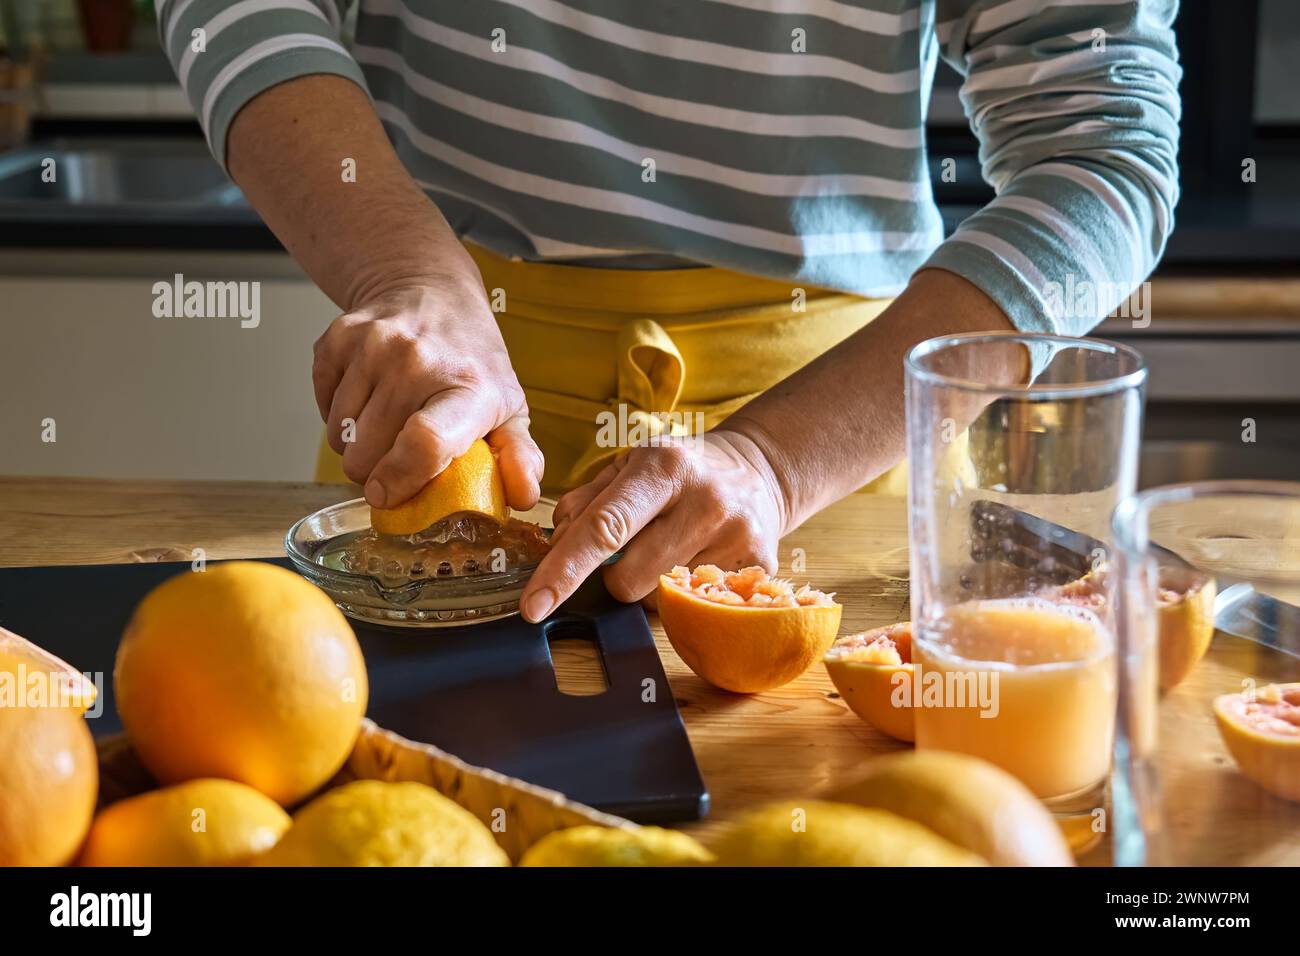 Female hands making homemade grapefruit juice with hand citrus juicer. Anonymous woman preparing fresh grapefruit juice in the kitchen. Stock Photo